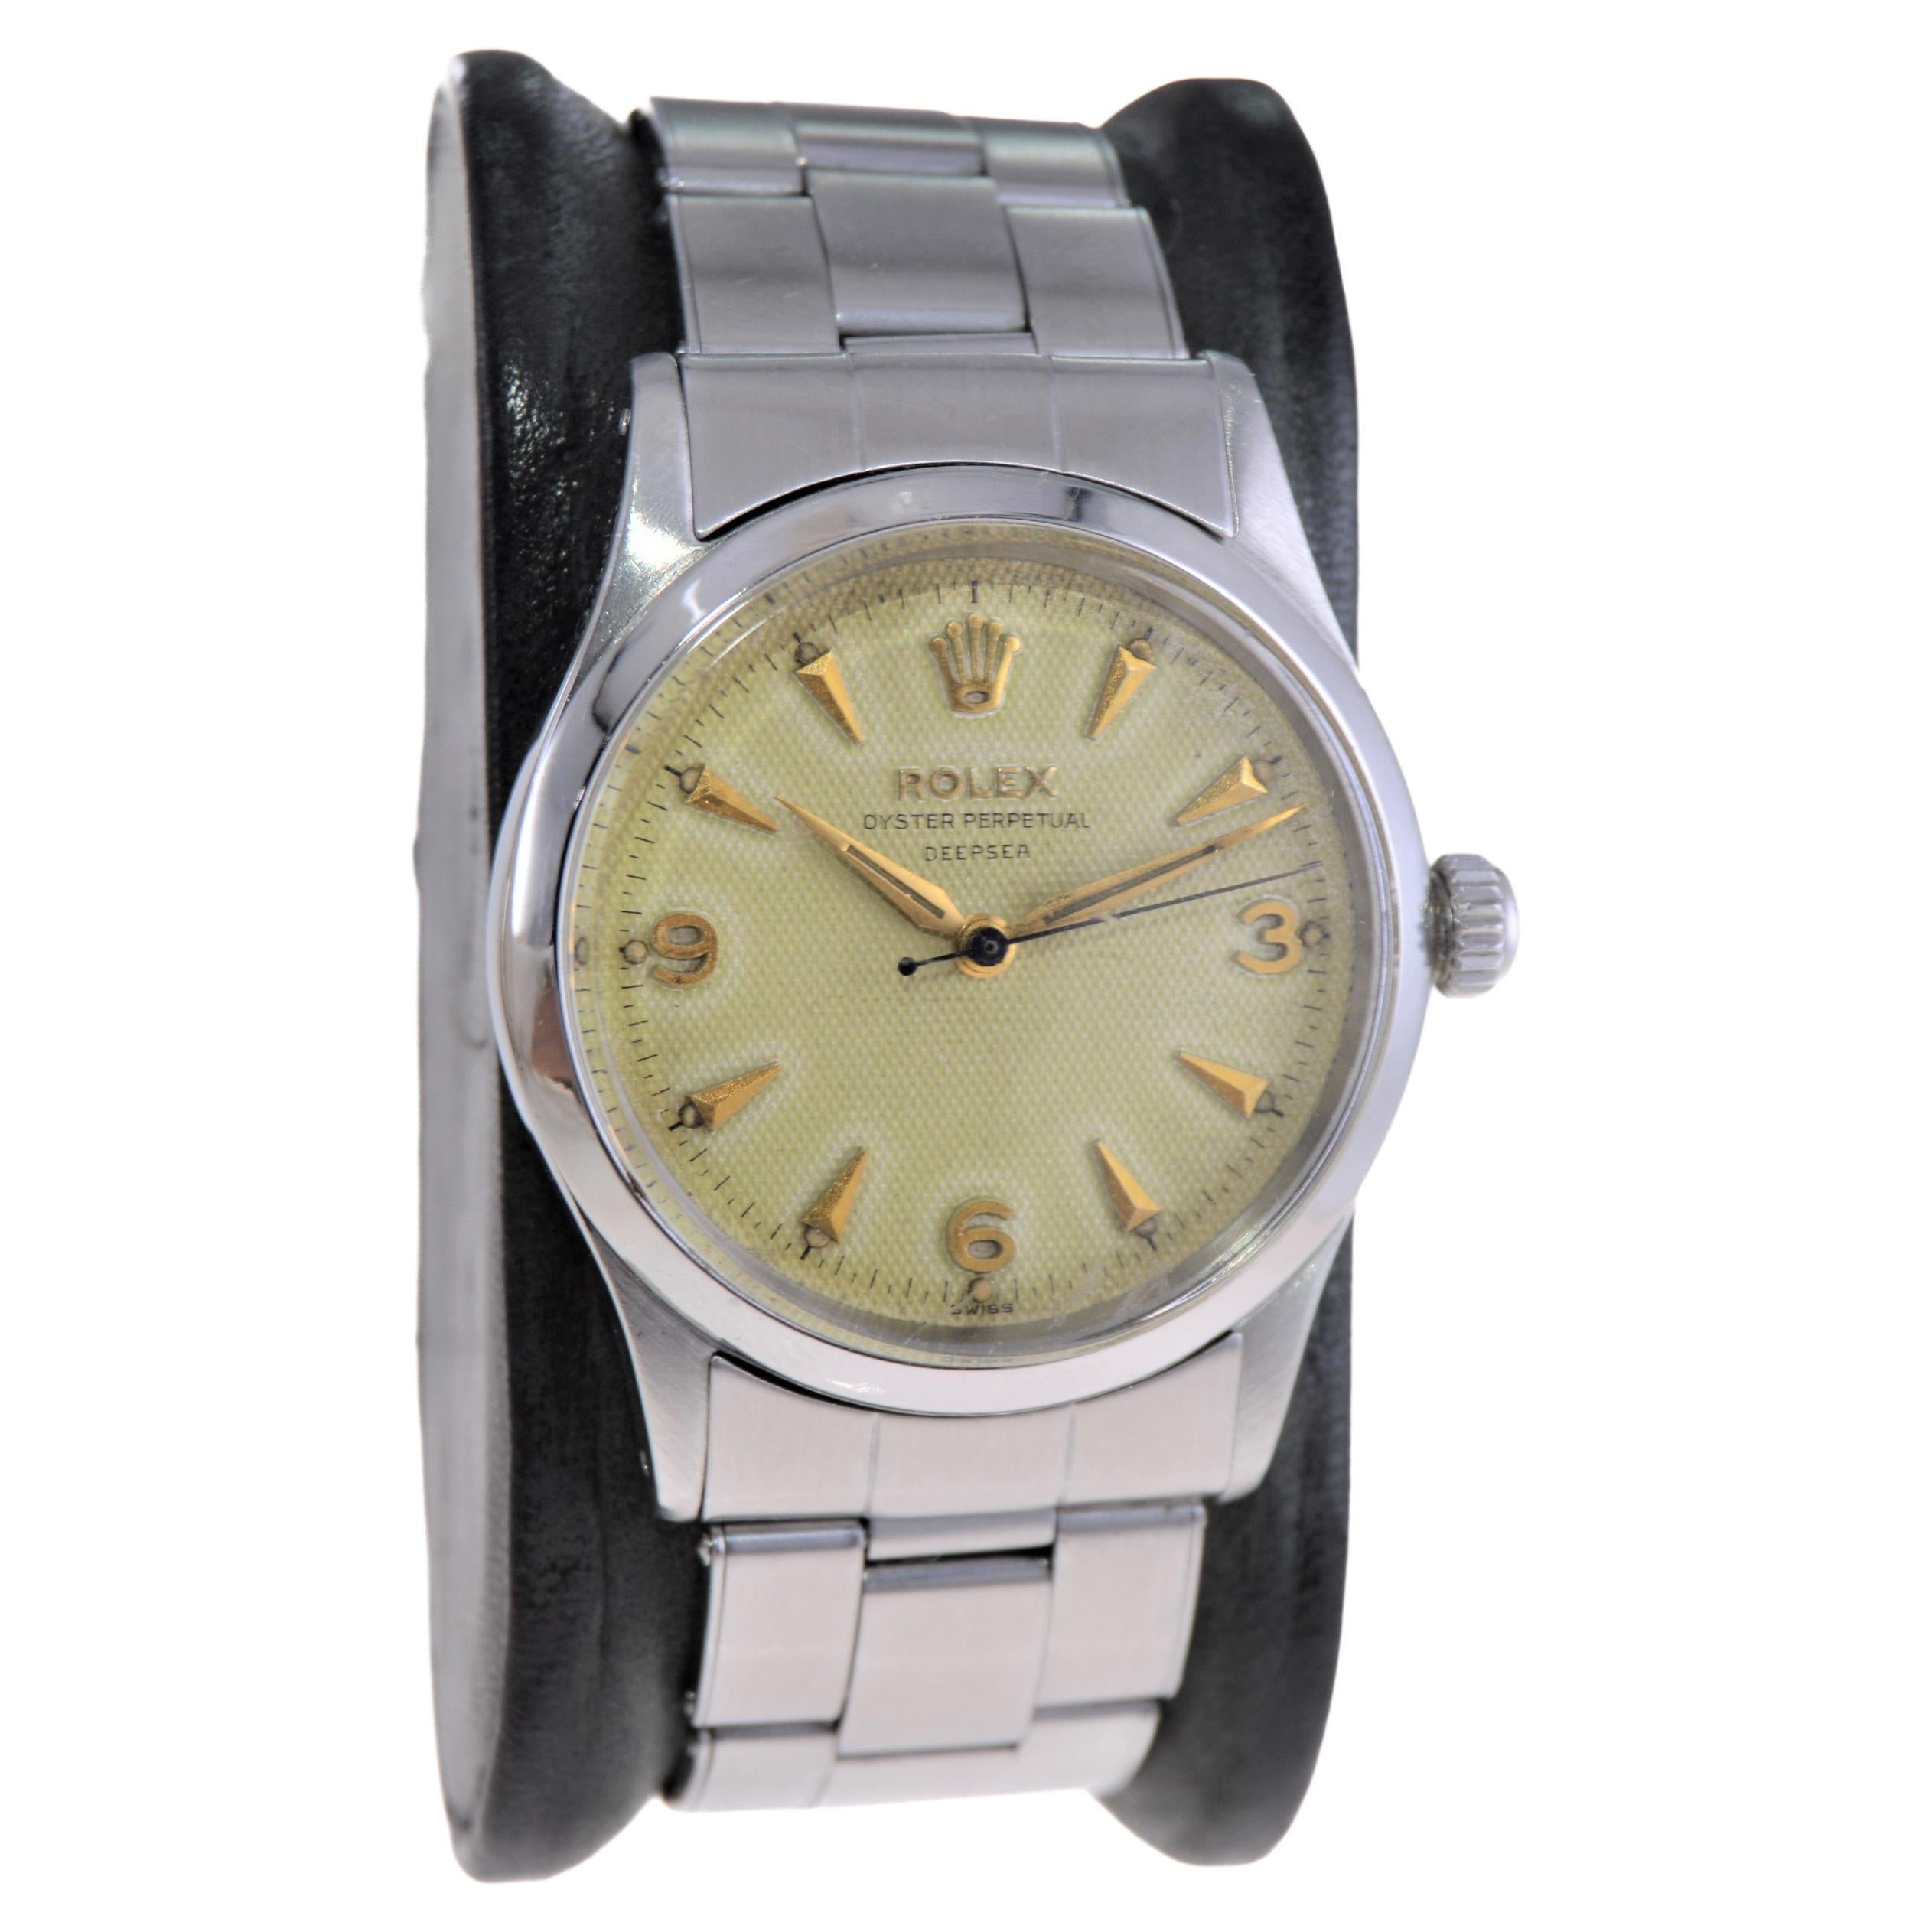 FACTORY / HOUSE: Rolex Watch Company
STYLE / REFERENCE: Oyster Perpetual 